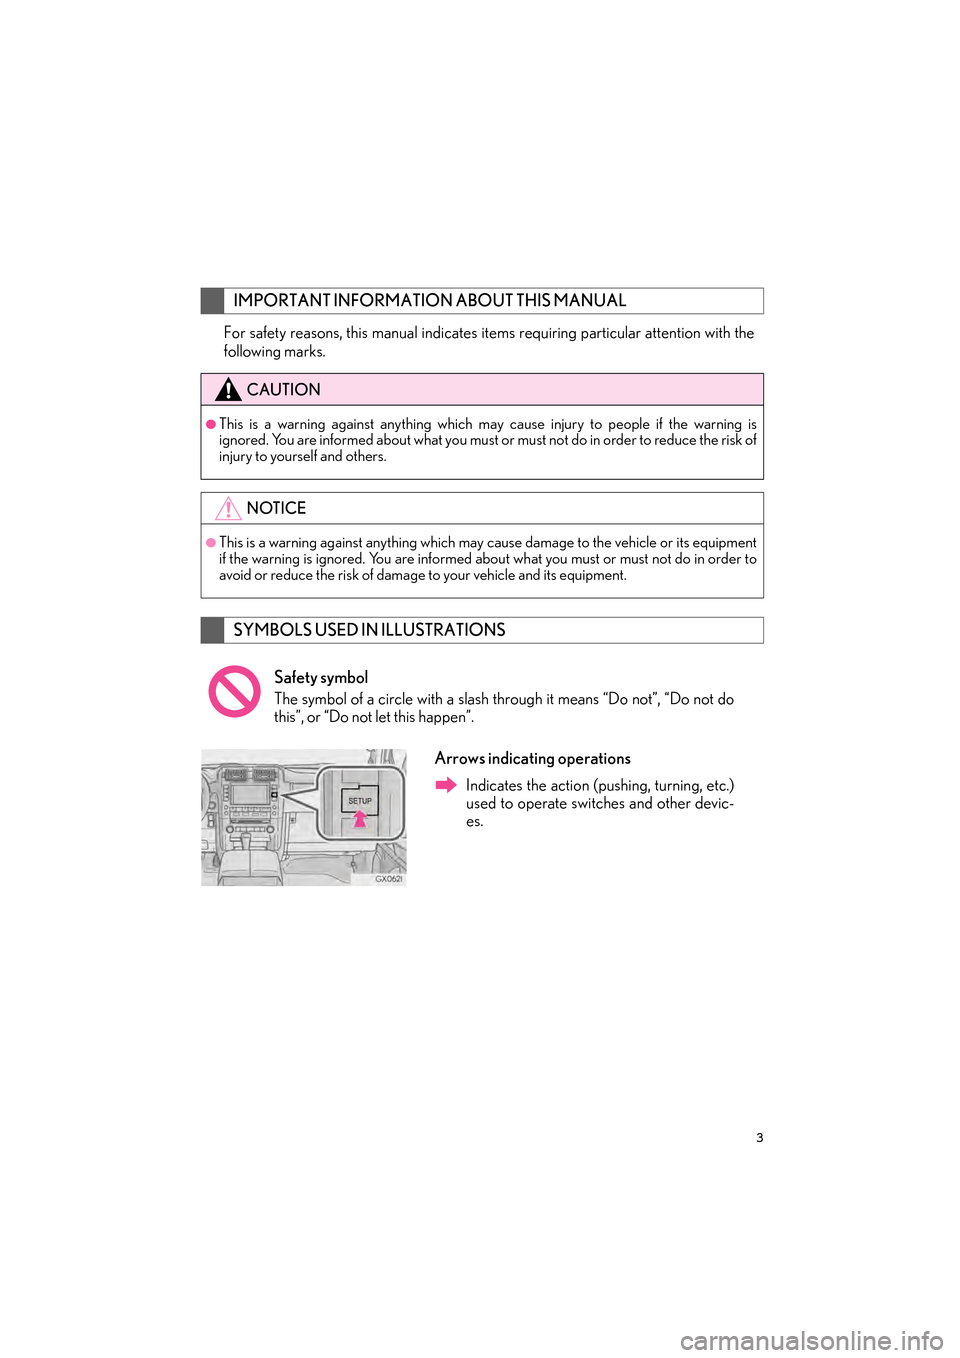 Lexus GX460 2015  Navigation Manual 3
GX460_Navi_OM60L77U_(U)14.06.02     10:48
For safety reasons, this manual indicates items requiring particular attention with the
following marks.
IMPORTANT INFORMATION ABOUT THIS MANUAL
CAUTION
●